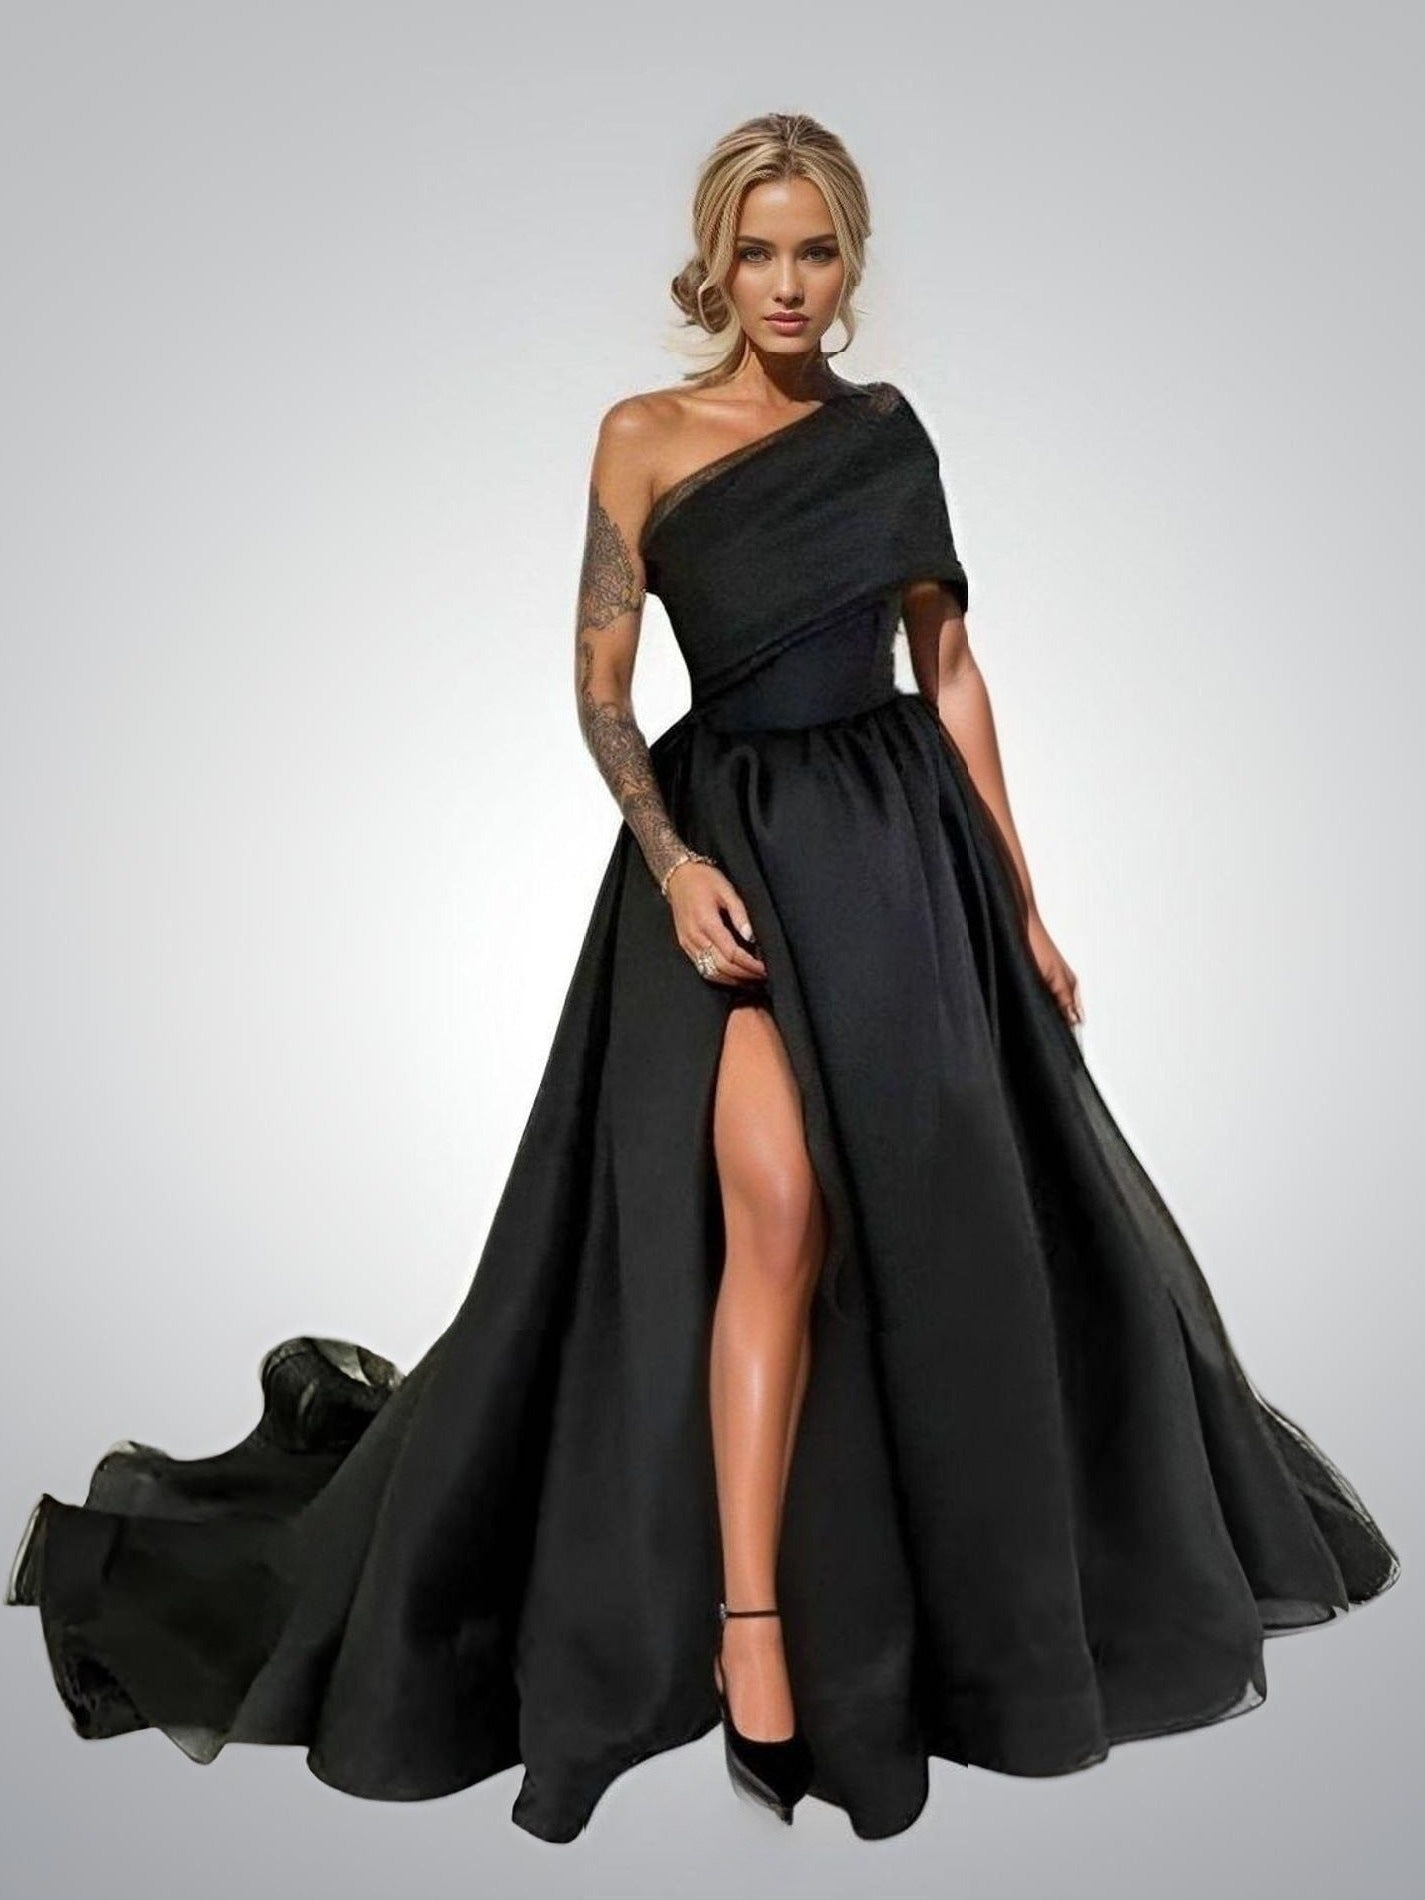 Woman with tattoo showcasing Chic Black One Shoulder Evening Dress with High Slit